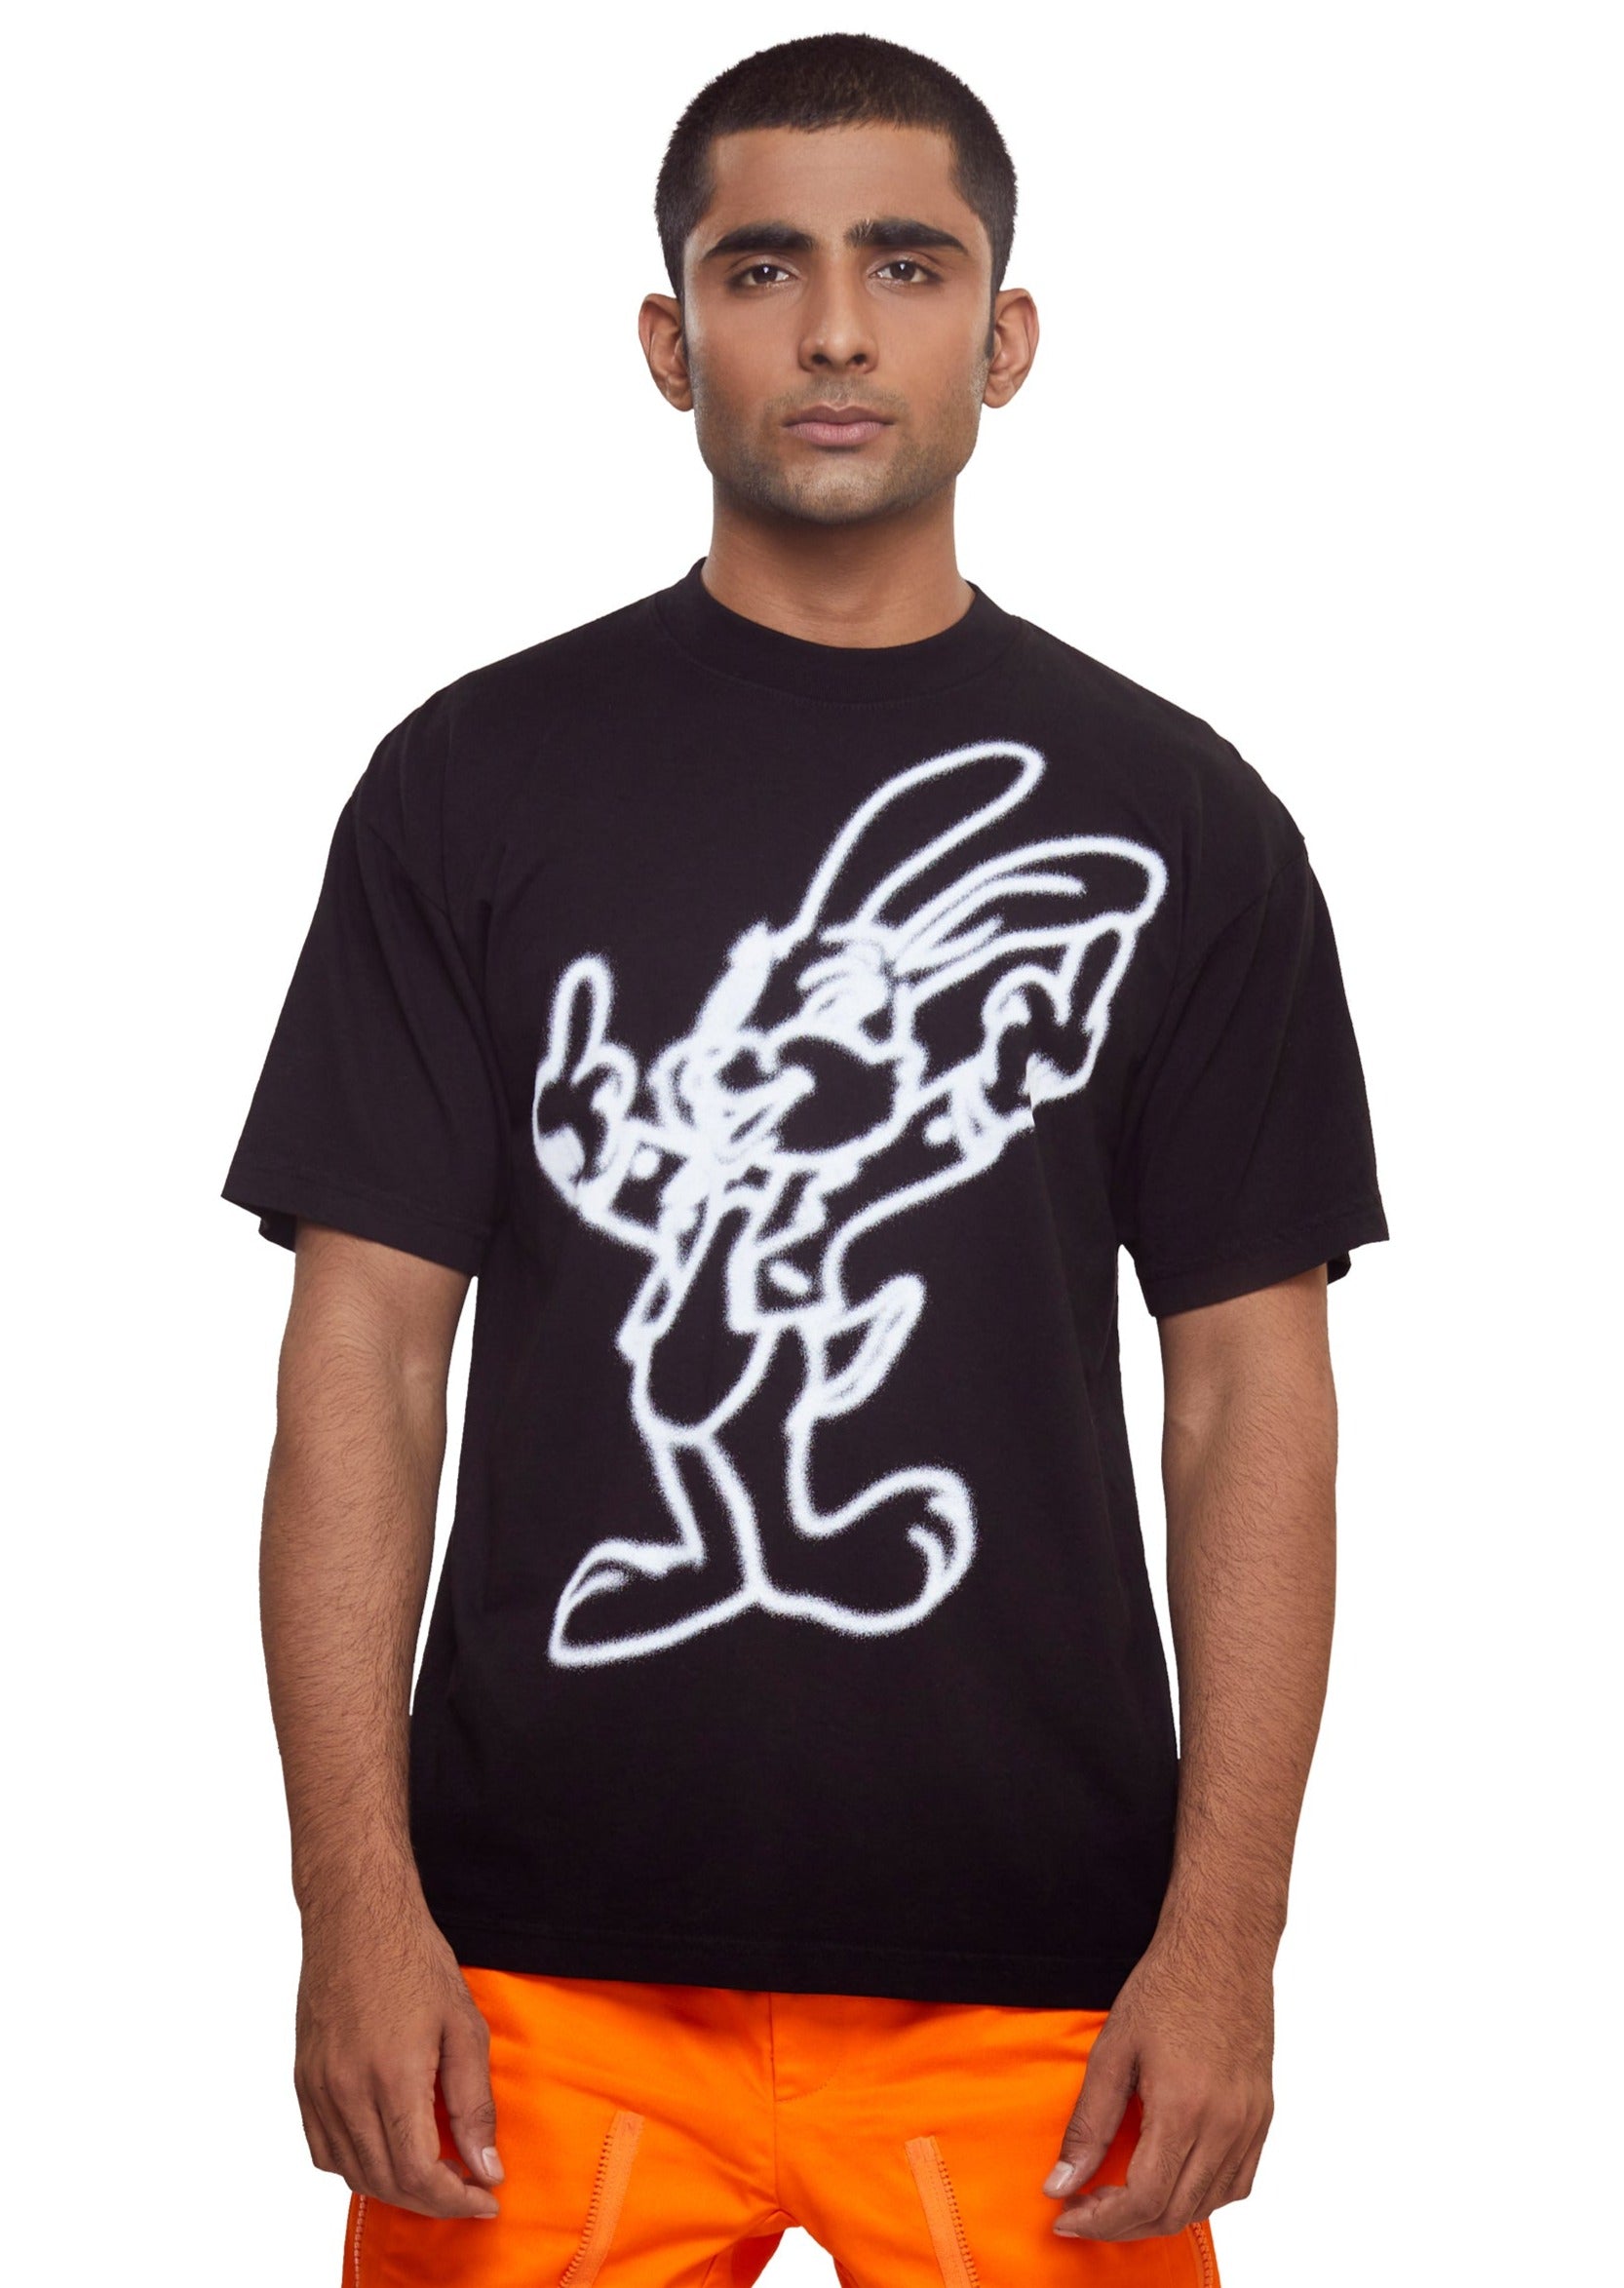 Graphic t-shirt by Domrebel in a medium weight 100% cotton fabric with a rabit Print